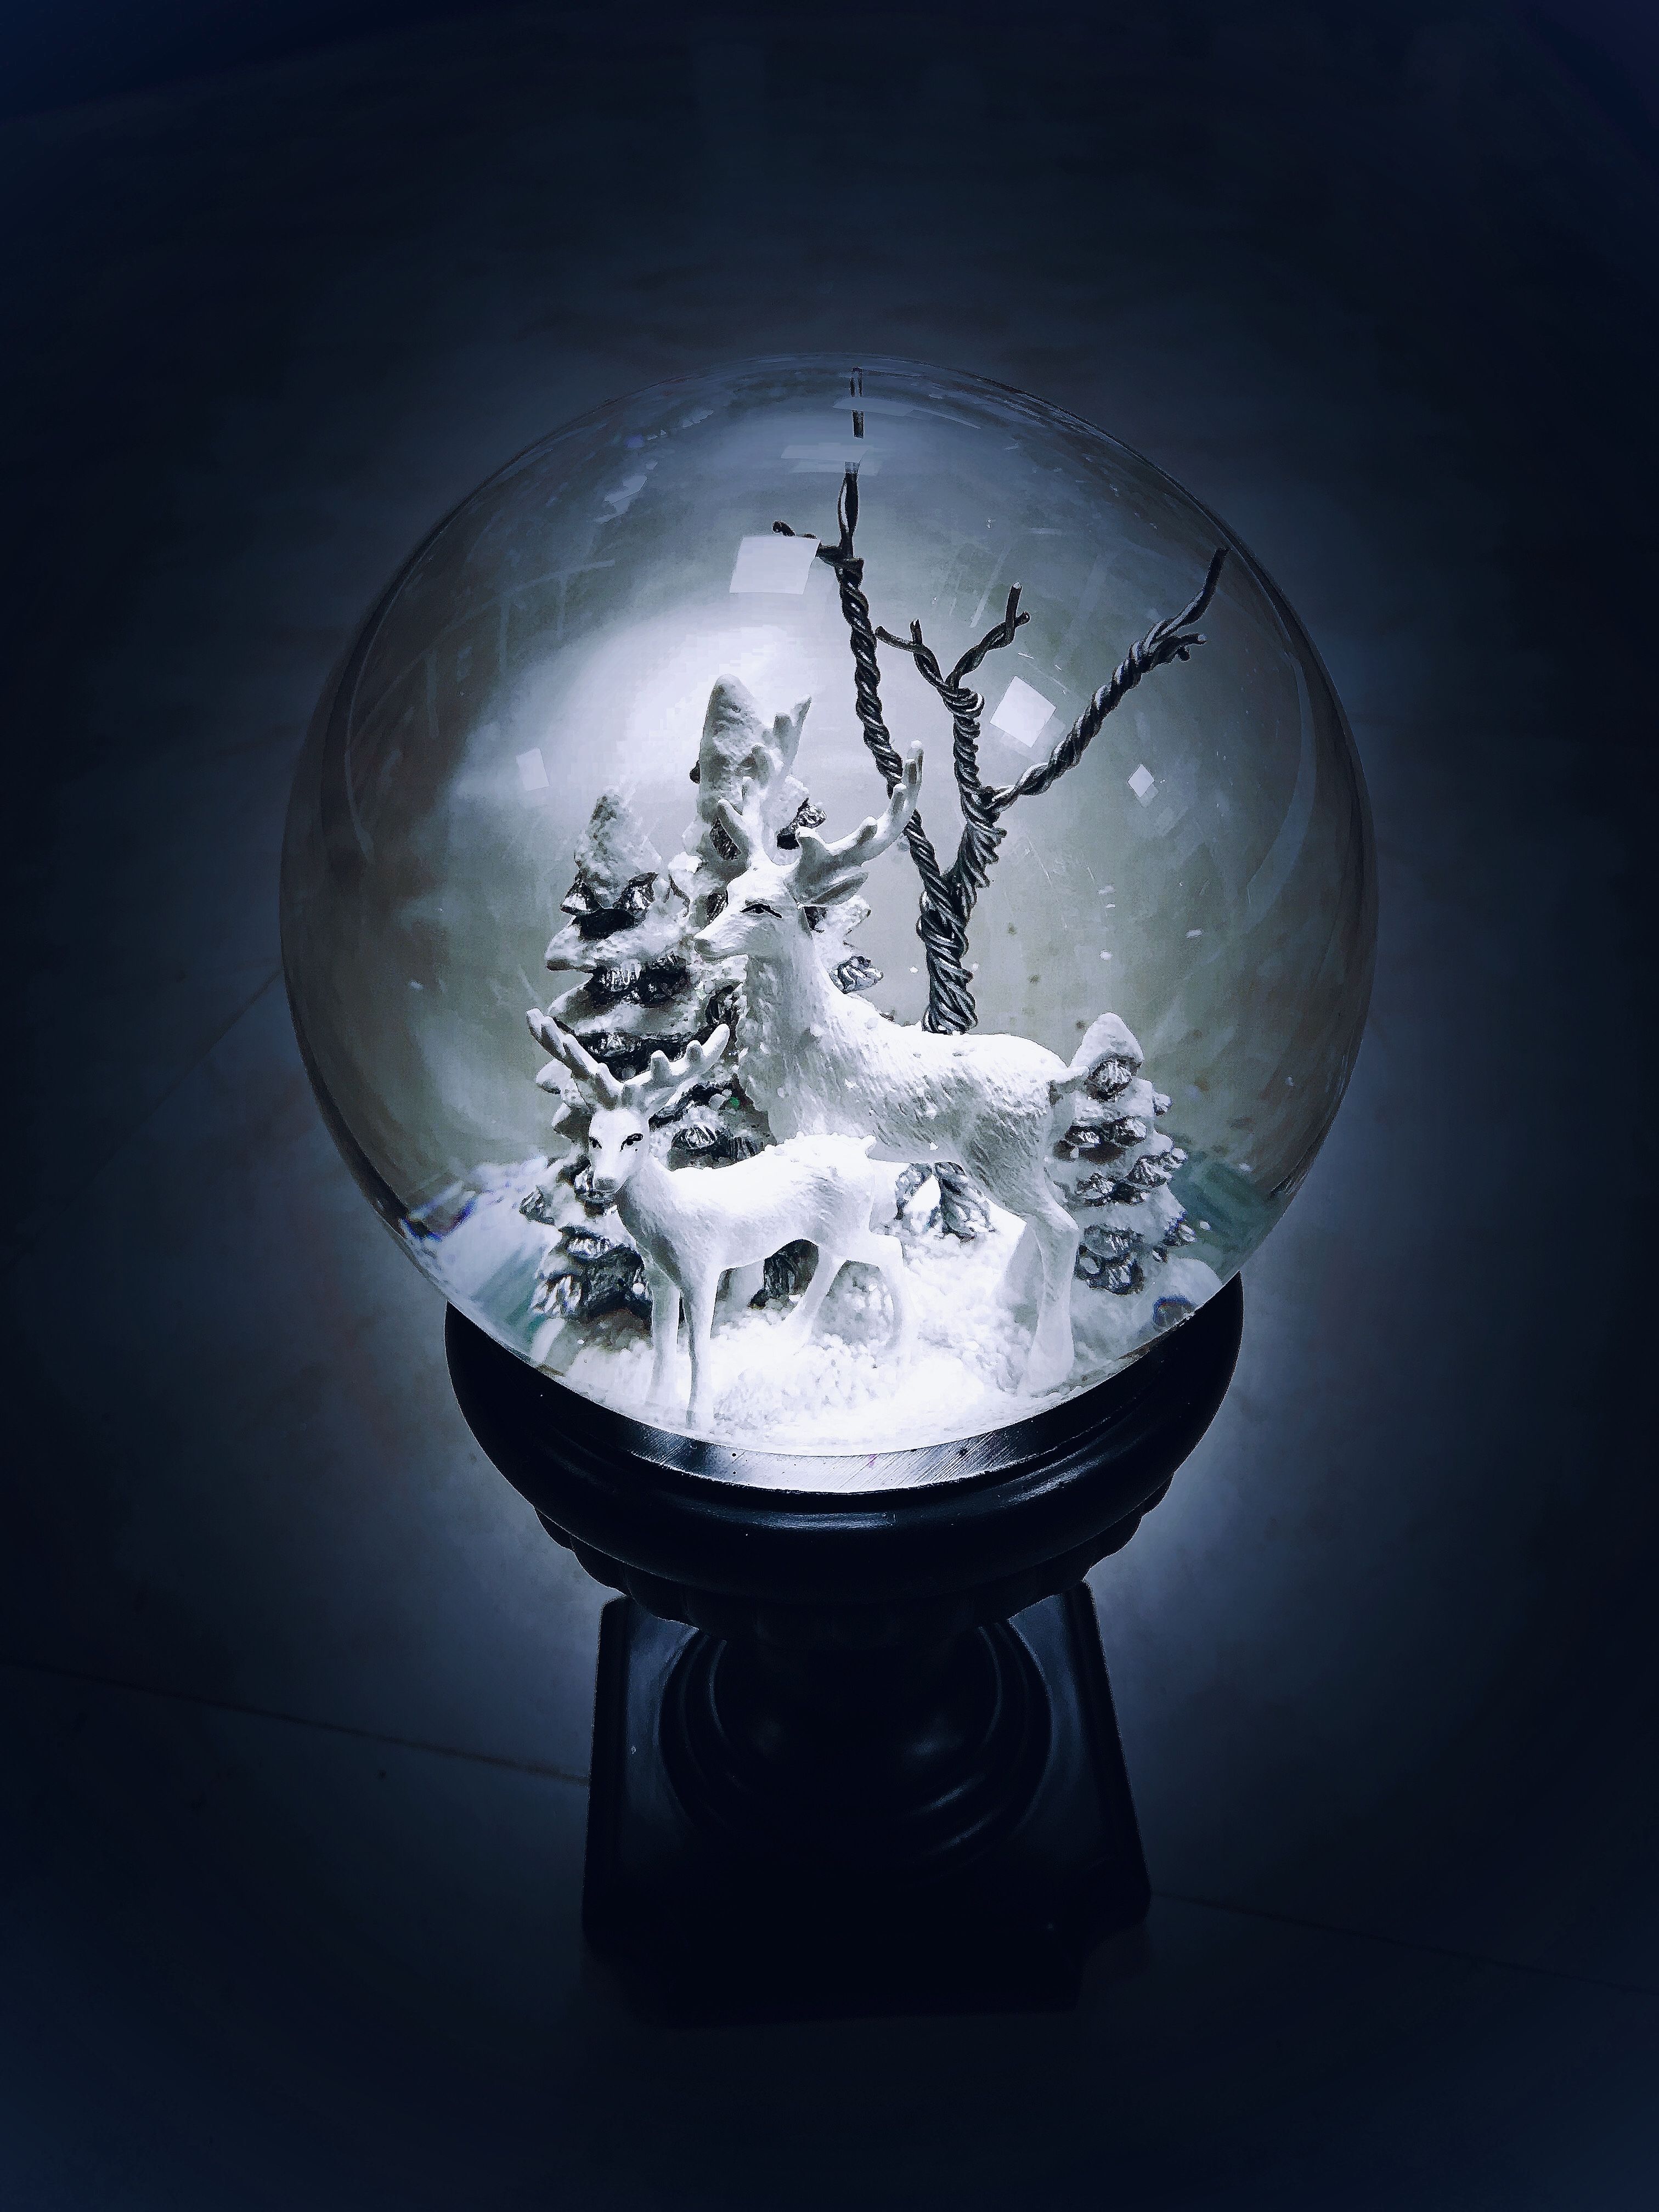 Mysterious glowing snow globe of white reindeers. Globe wallpaper, Snow globes, White reindeer